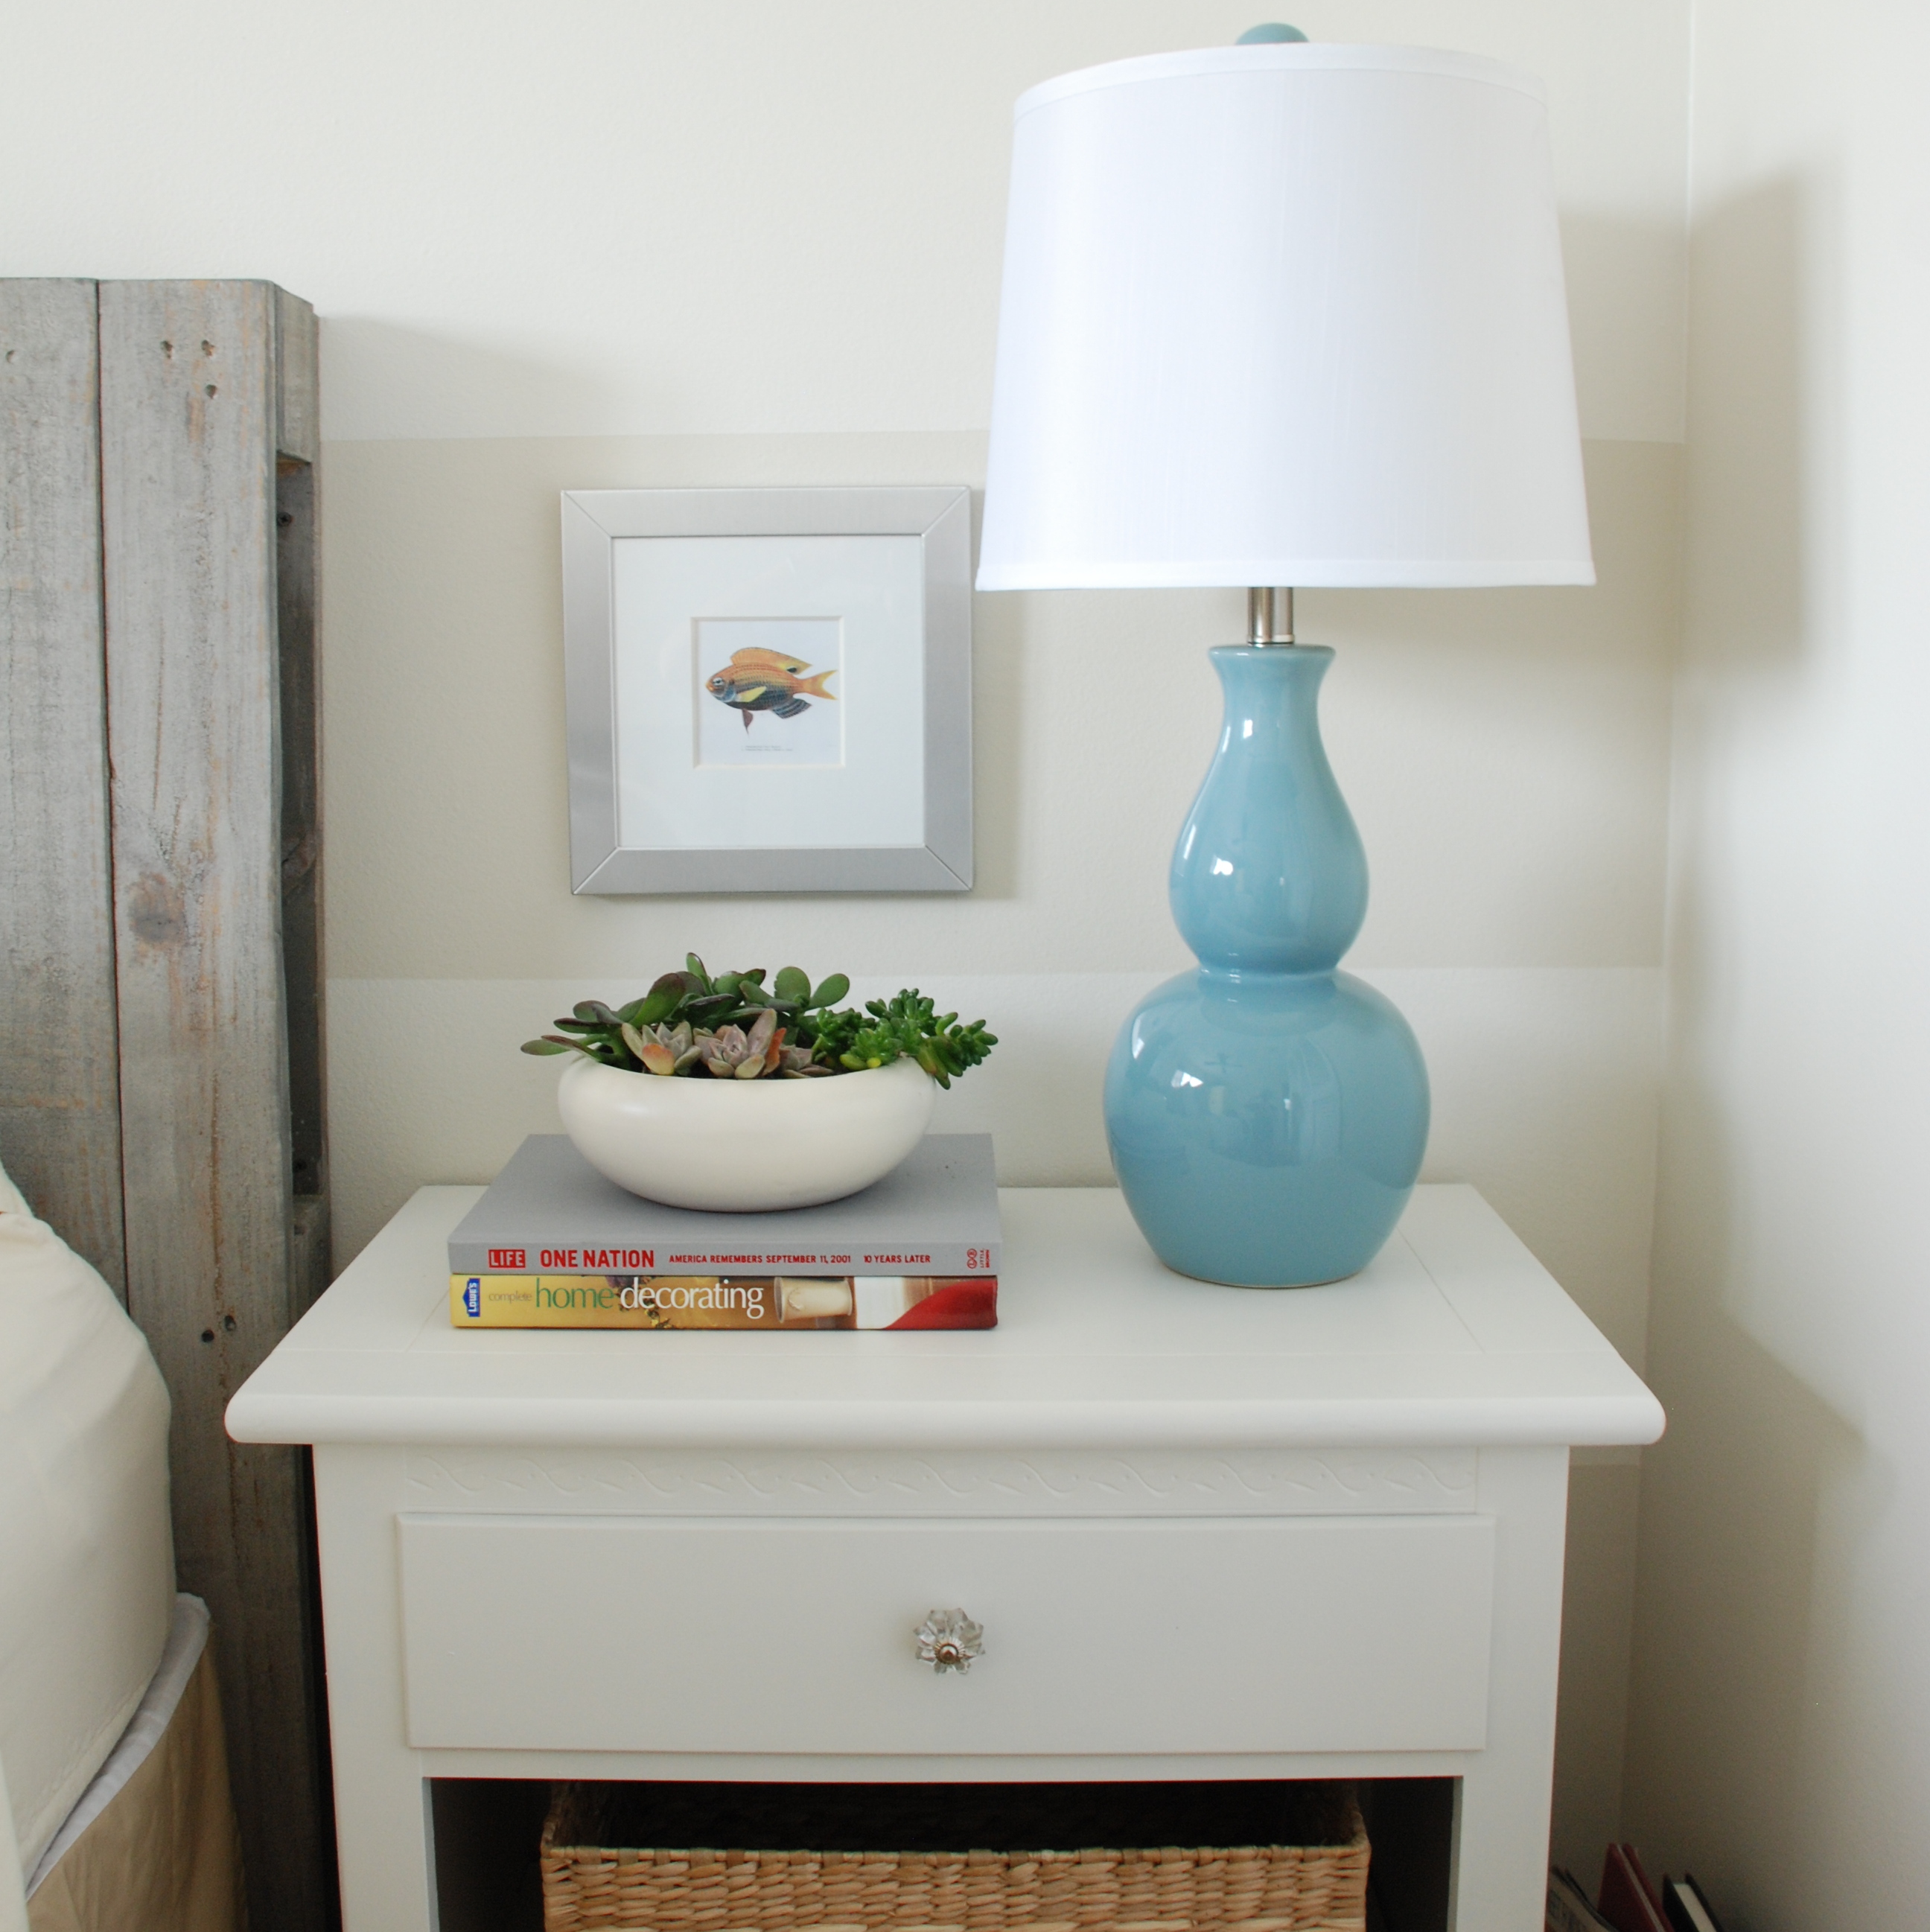 Bedroom Nightstand With Family Photos